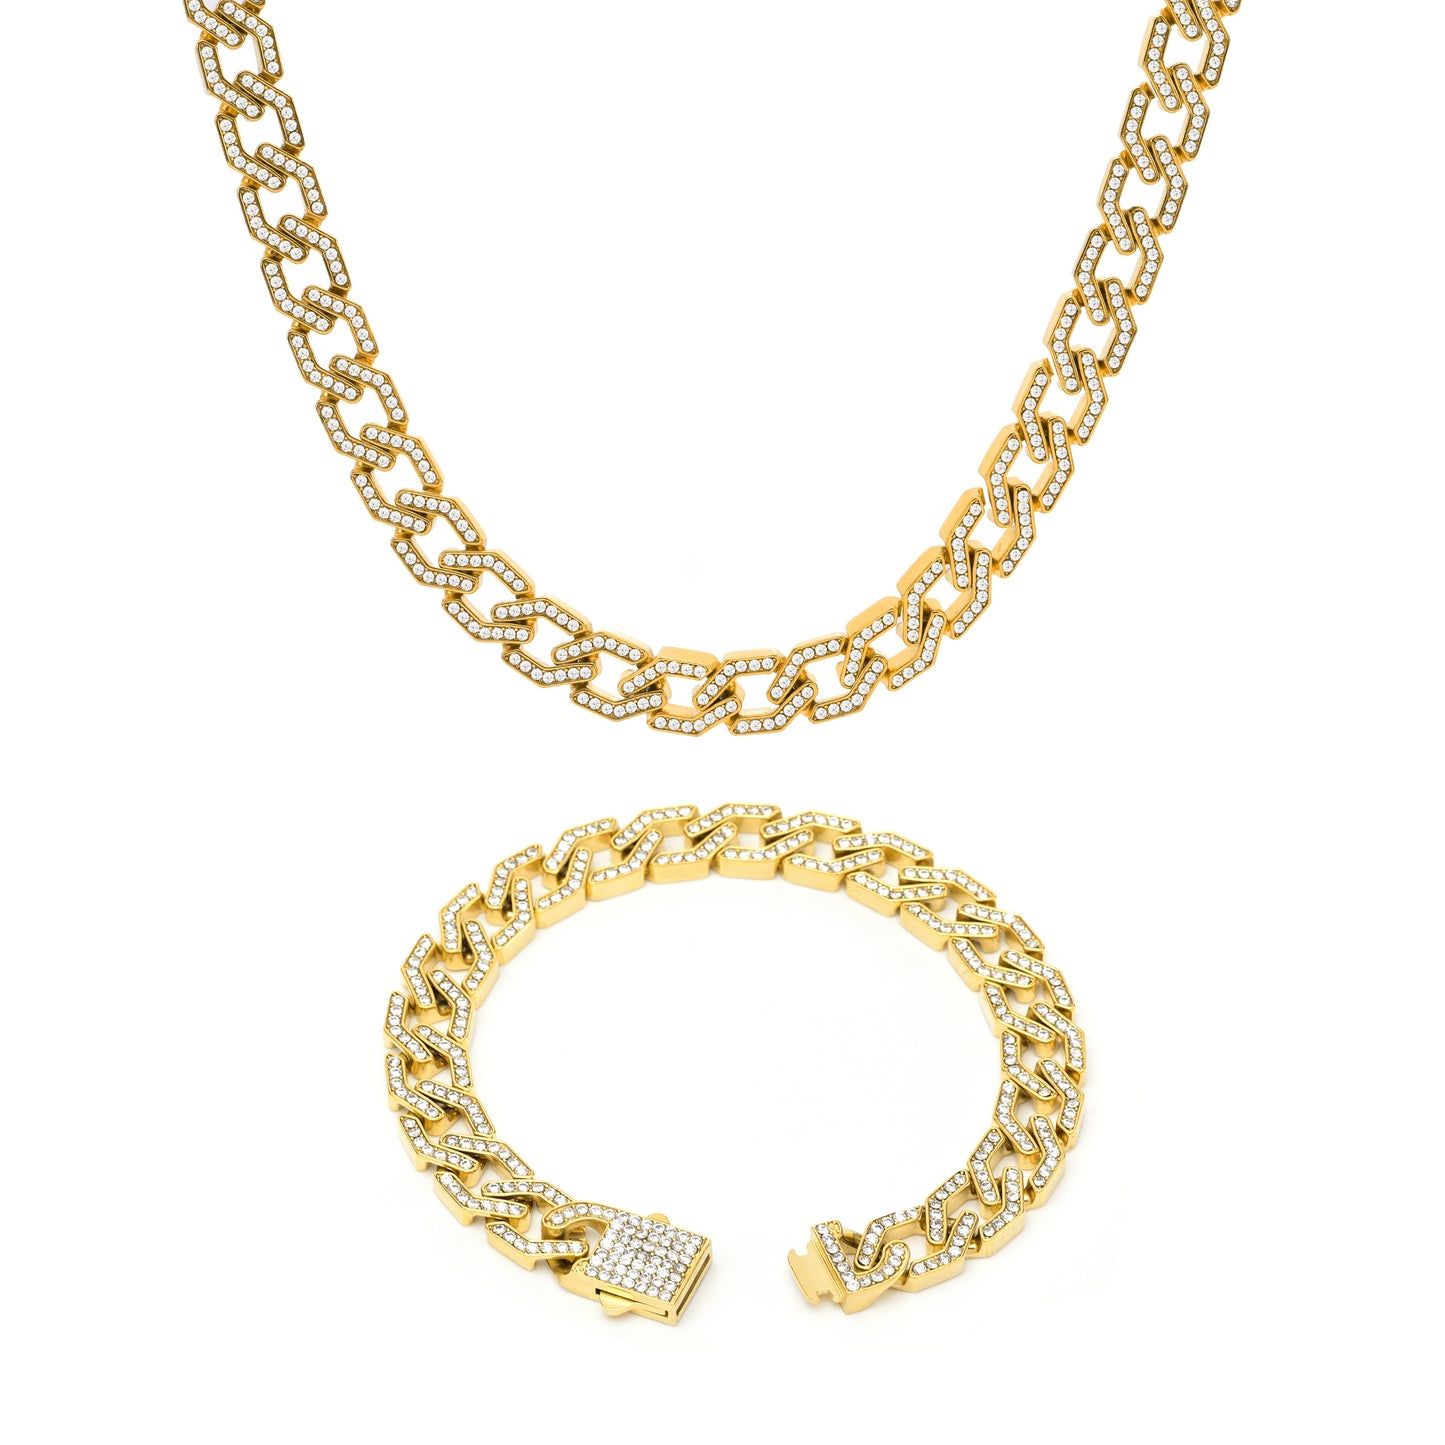 Cuban Link Chain Bracelets With High Quality Rhinstones Double Gold plating